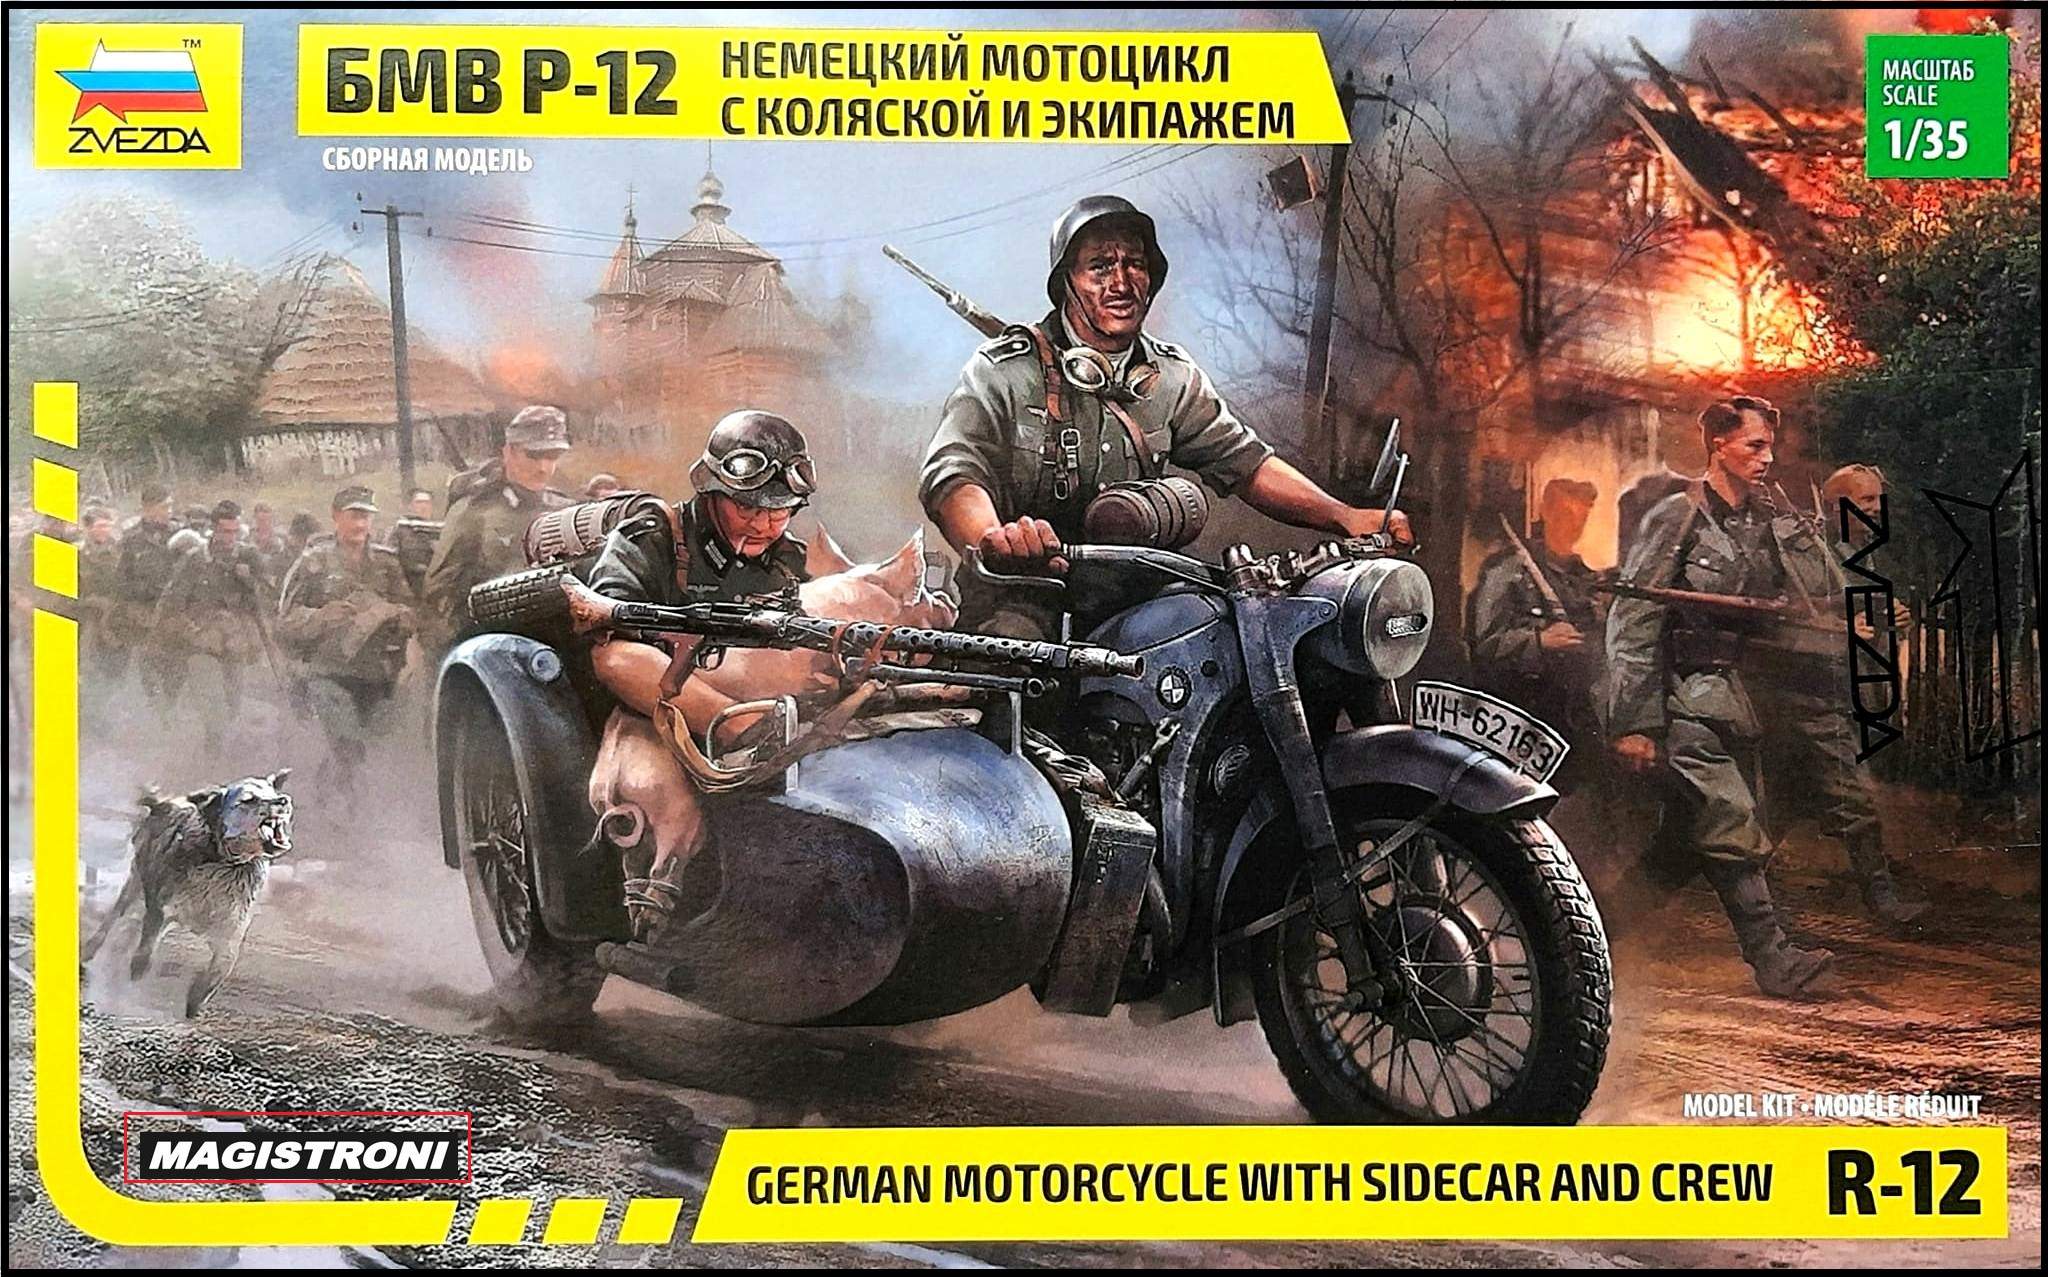 GERMAN MOTORCYCLE R-12 With Sidecar and Crew